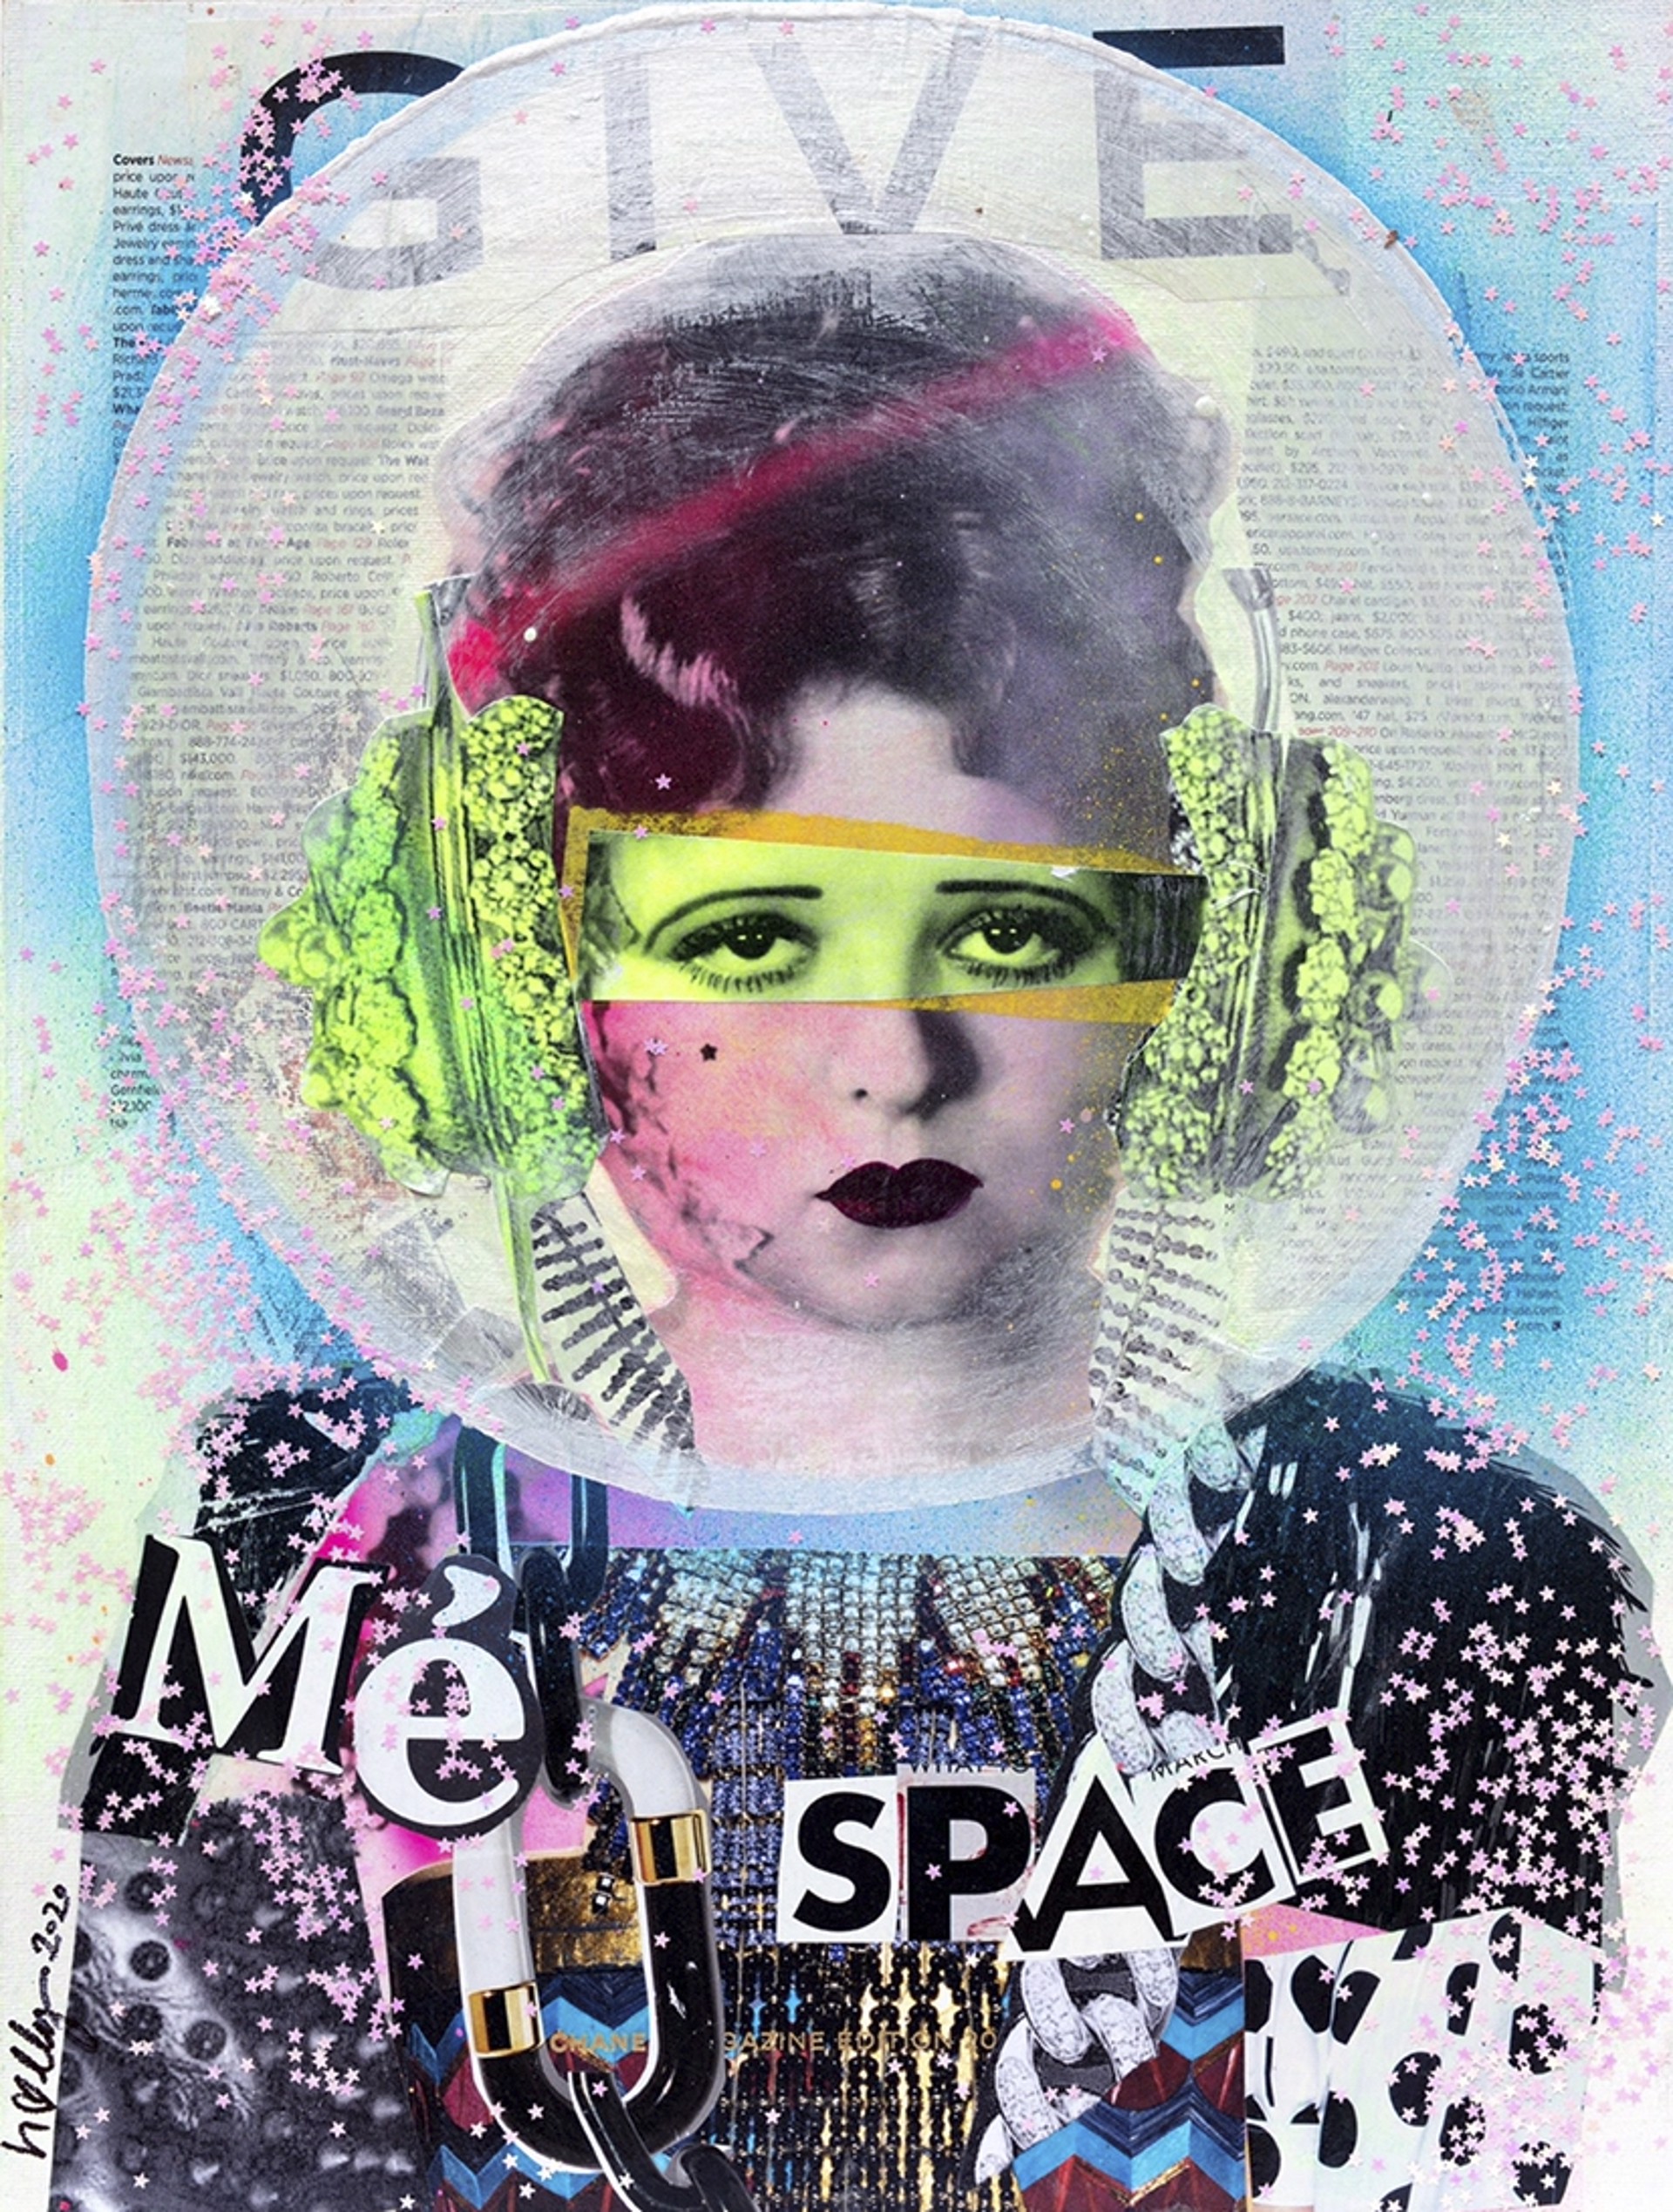 Give Me Space by Holly Rader